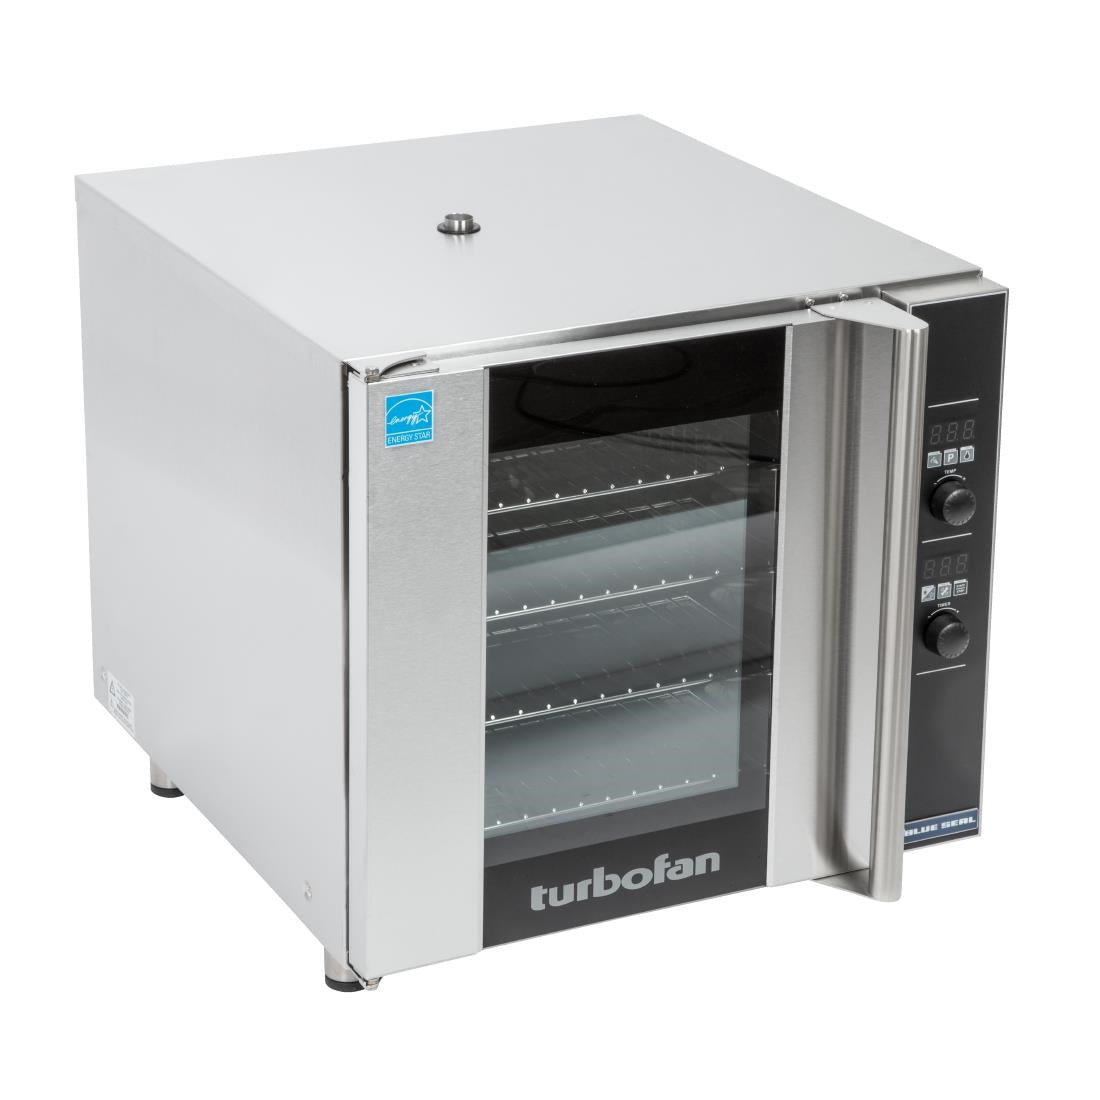 DL442 Blue Seal Turbofan Convection Oven E32D4 JD Catering Equipment Solutions Ltd